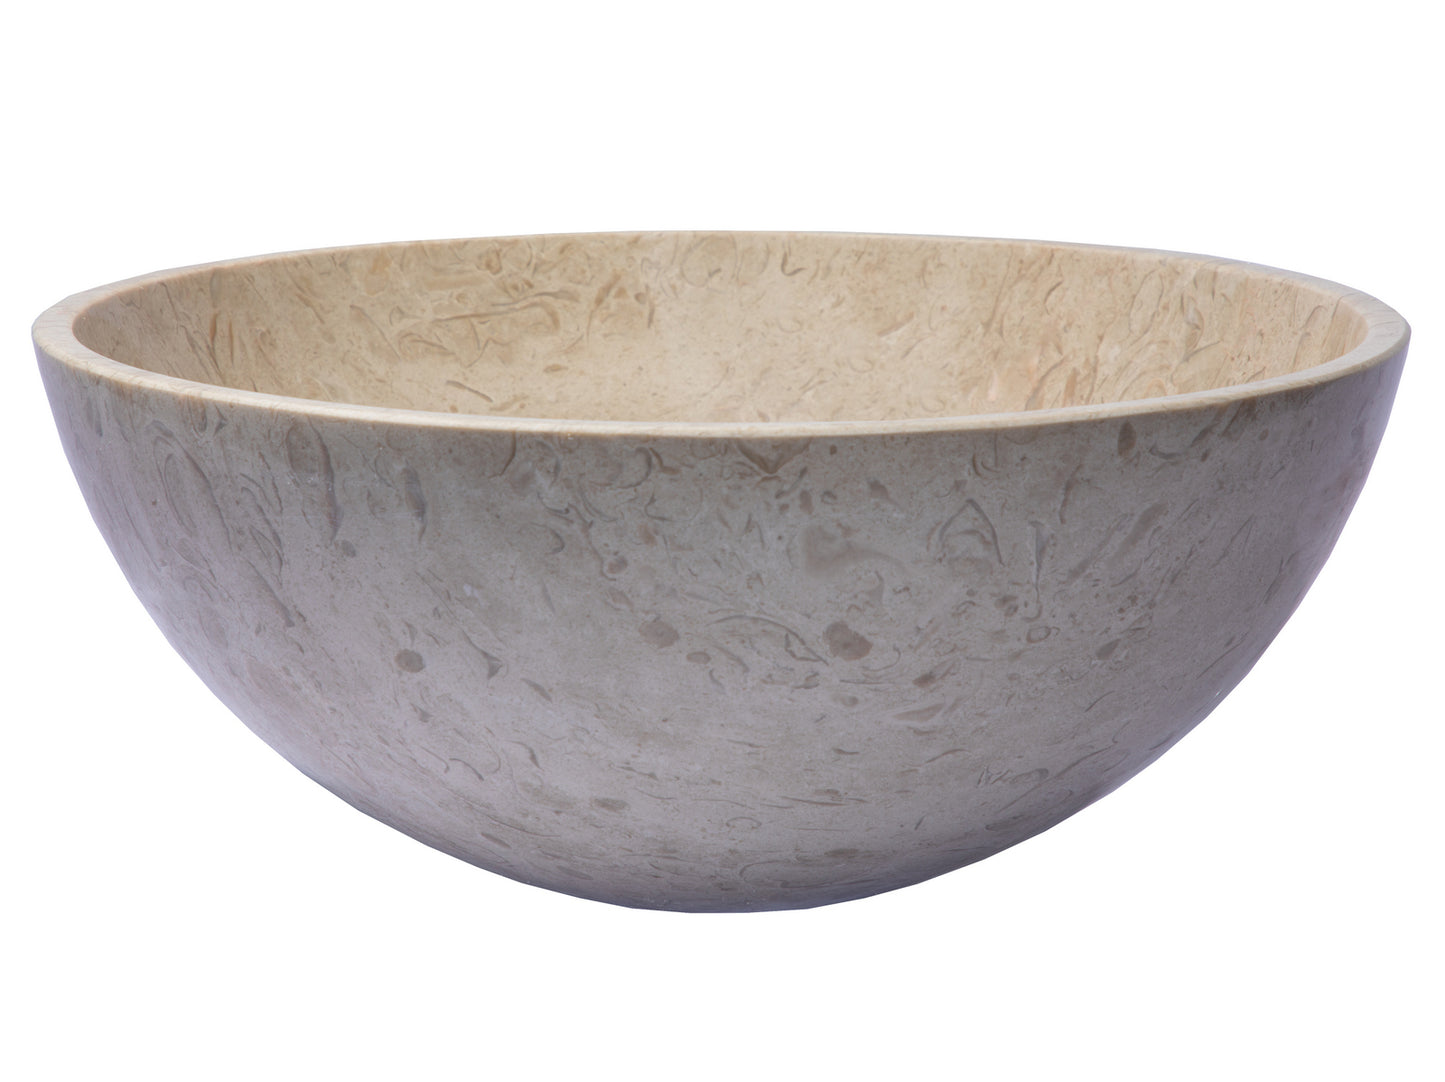 Small 14" Vessel Sink Bowl - Polished Penny Grey Marble